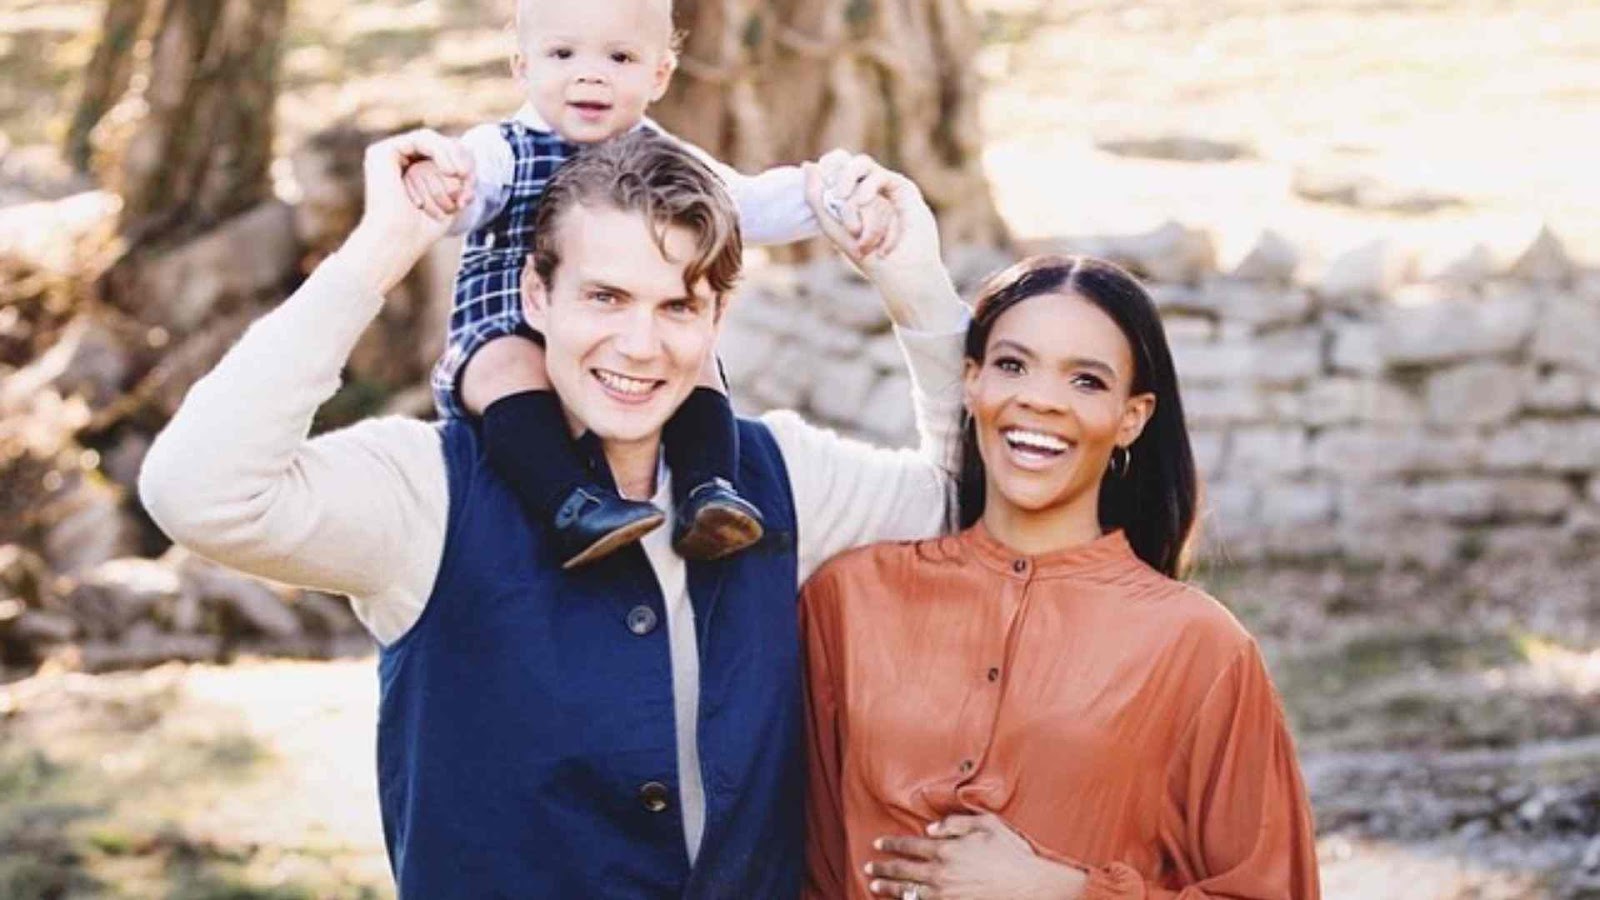 Personal life of Candace Owens